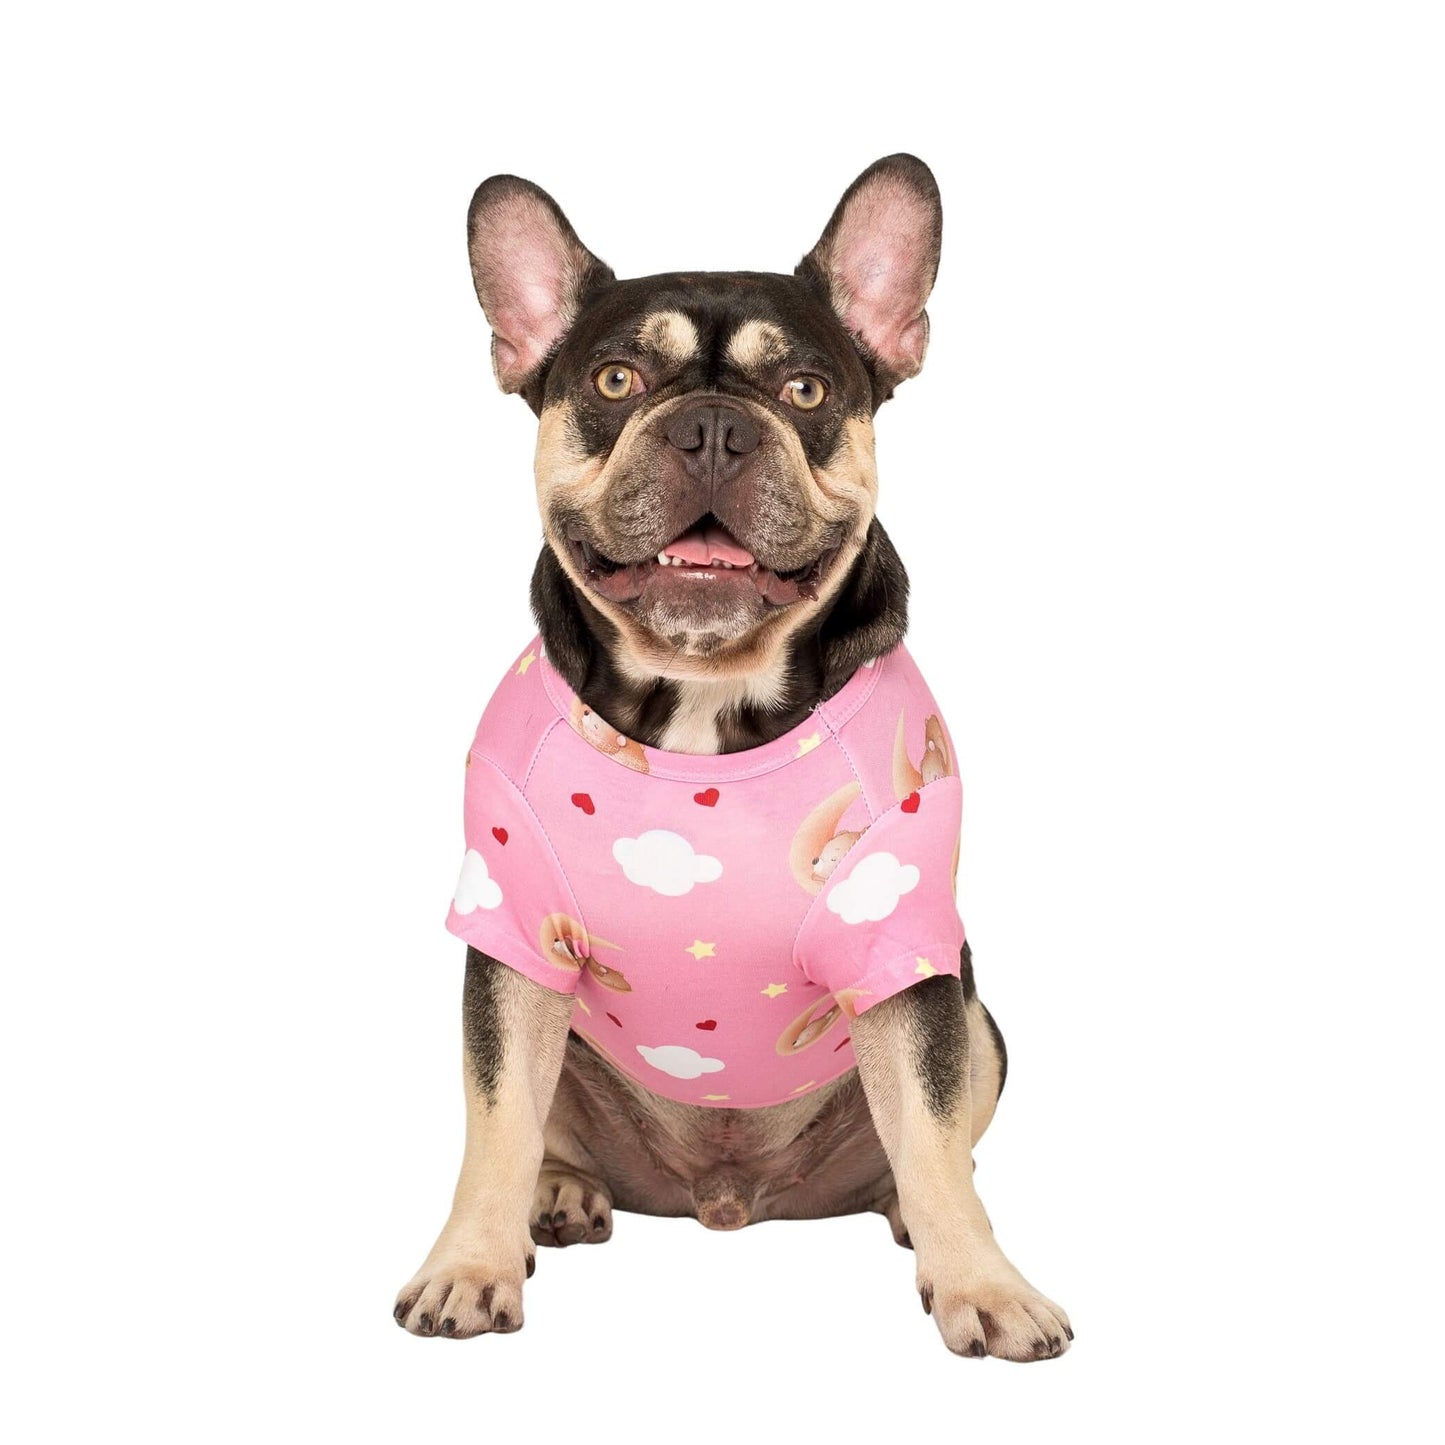 A close up of a chocolate and tan French Bulldog wearing Vibrant Hound's Lil dreamer pink pajama for dogs.